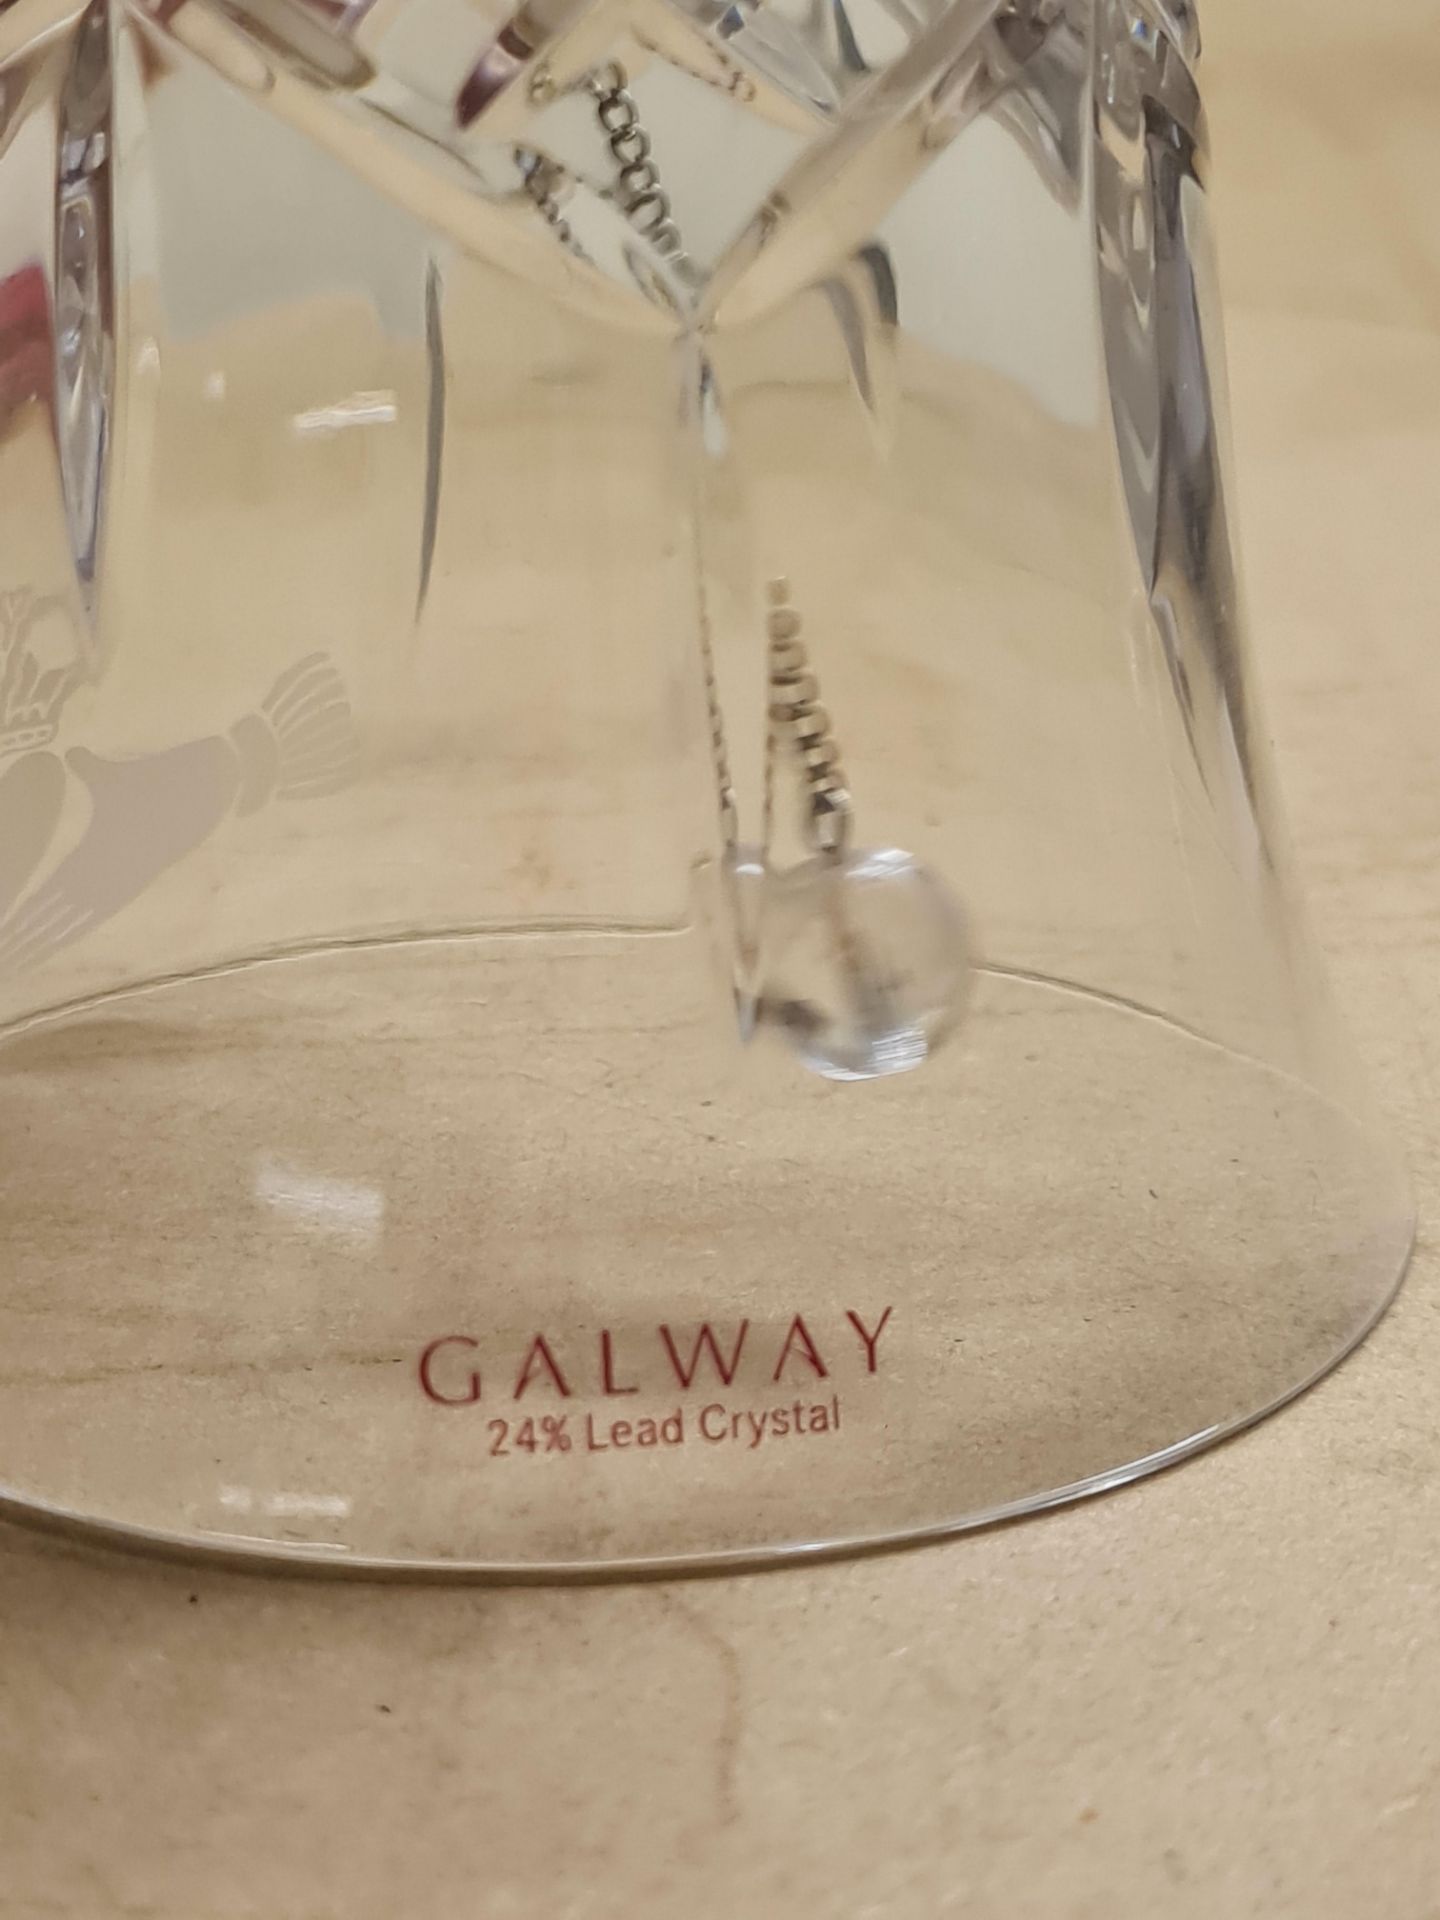 Galway Crystal Bell - Image 2 of 2